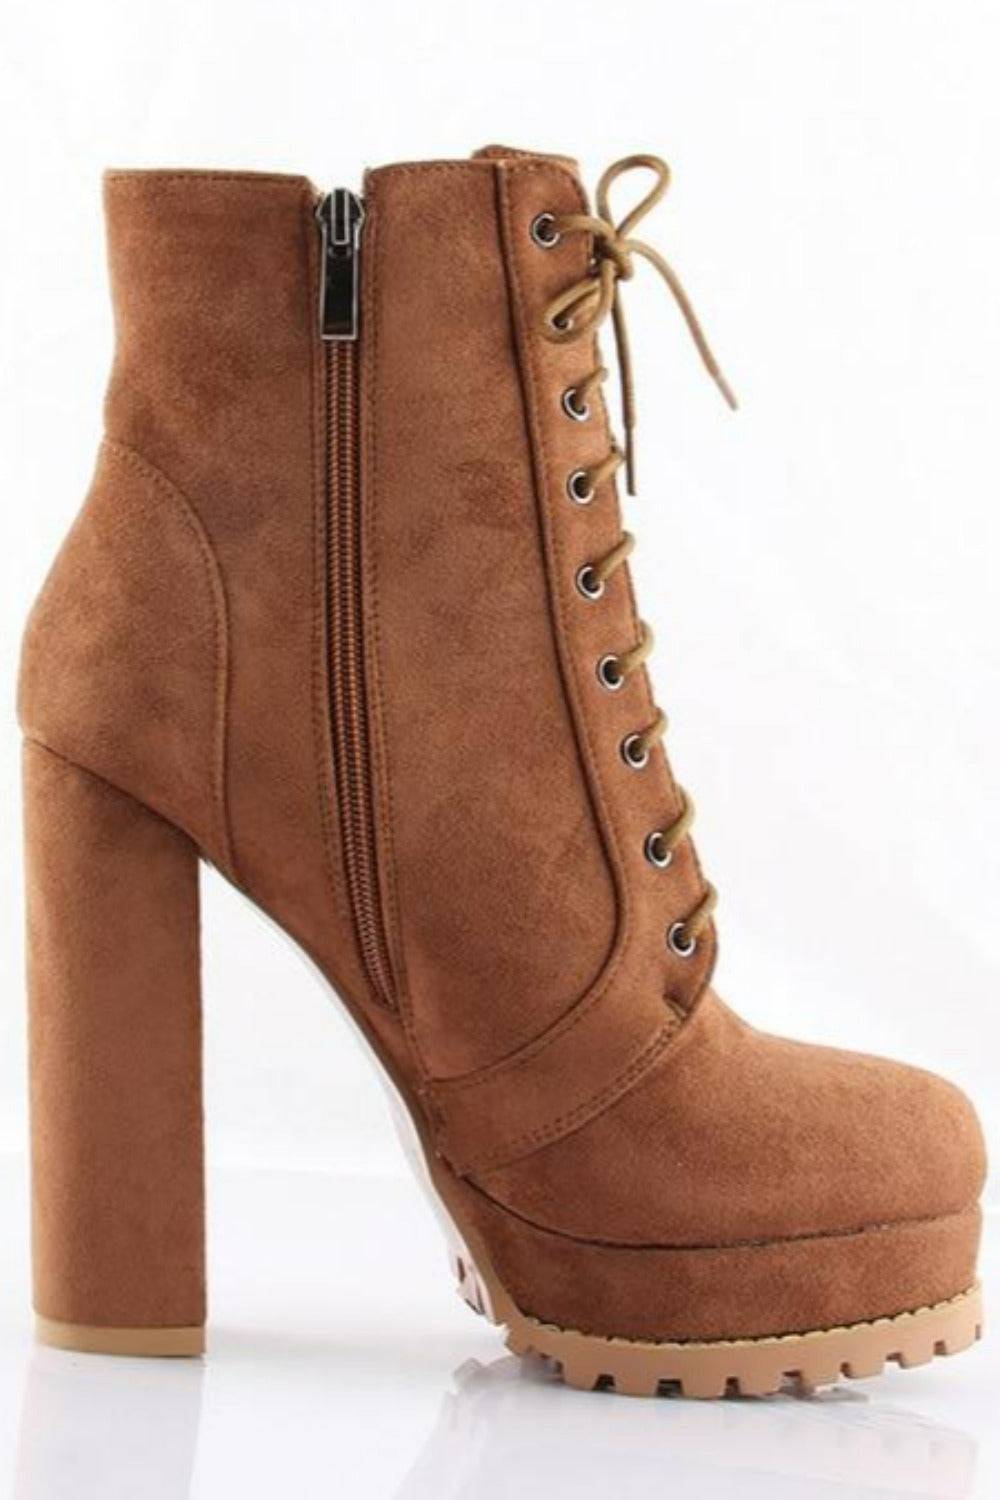 Platform Chunky Heeled Bootie - TGC Boutique - Ankle Booties